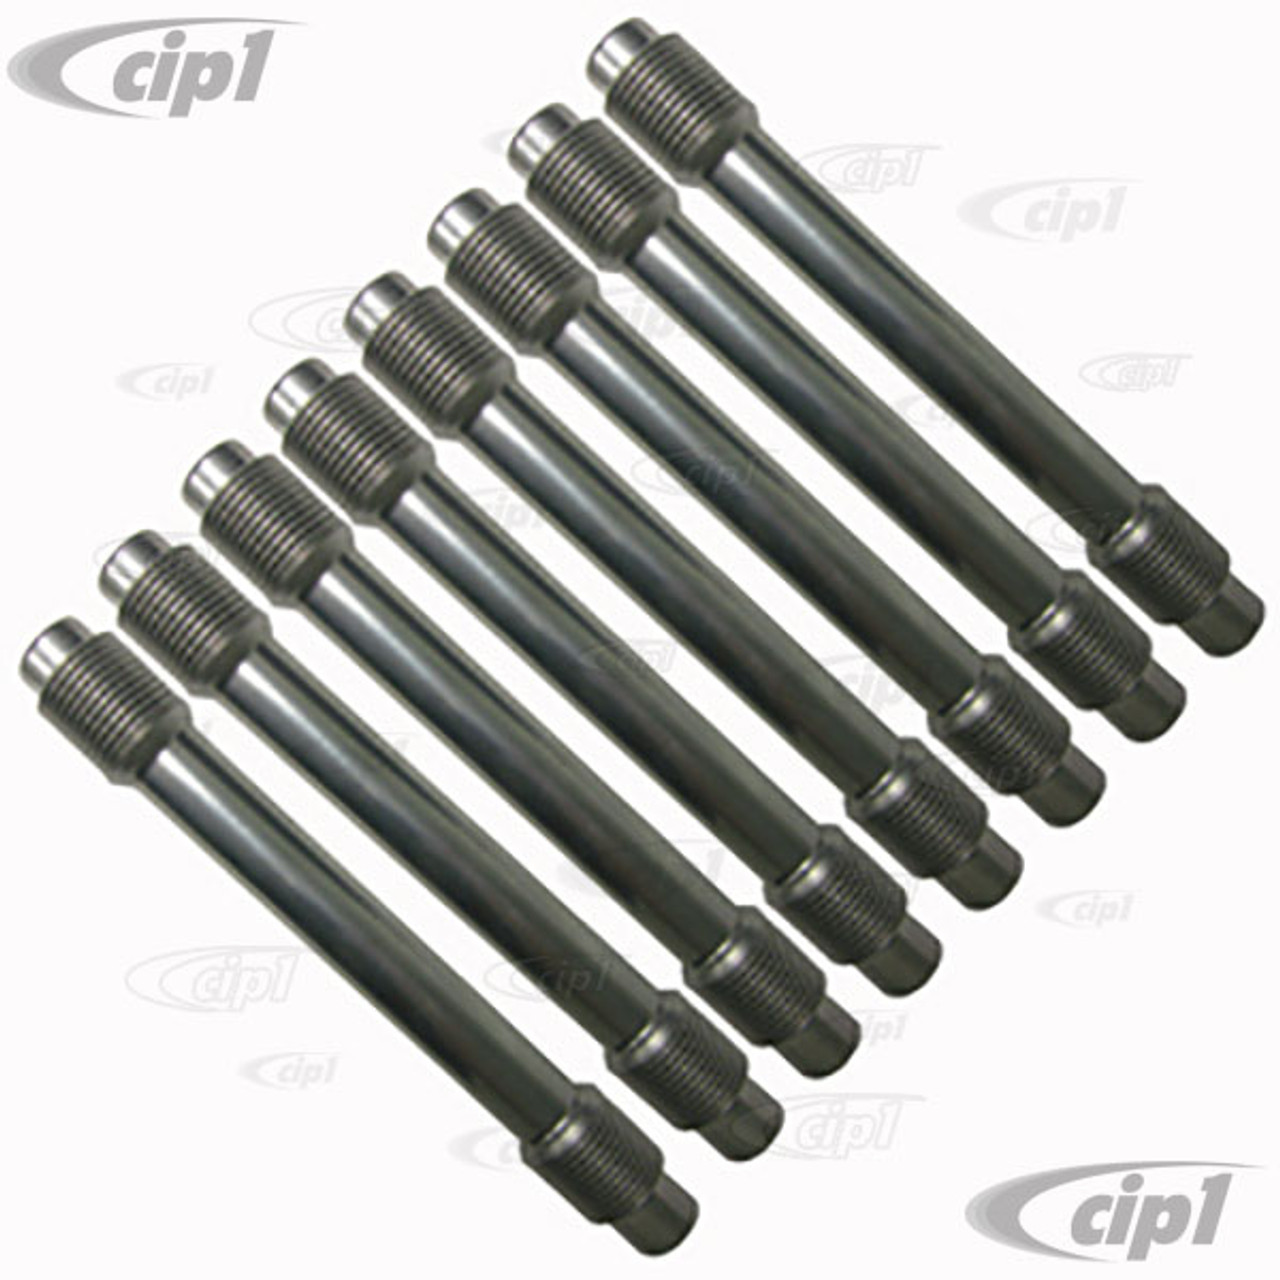 VWC-311-109-335-WG8 - (311109335 8531) - SET OF 8 STAINLESS STEEL WINDAGE  STYLE PUSH ROD TUBES (FOR BETTER OIL CONTROL) - FIT ALL 13-1600CC BEETLE  STYLE ENGINES - SET OF 8